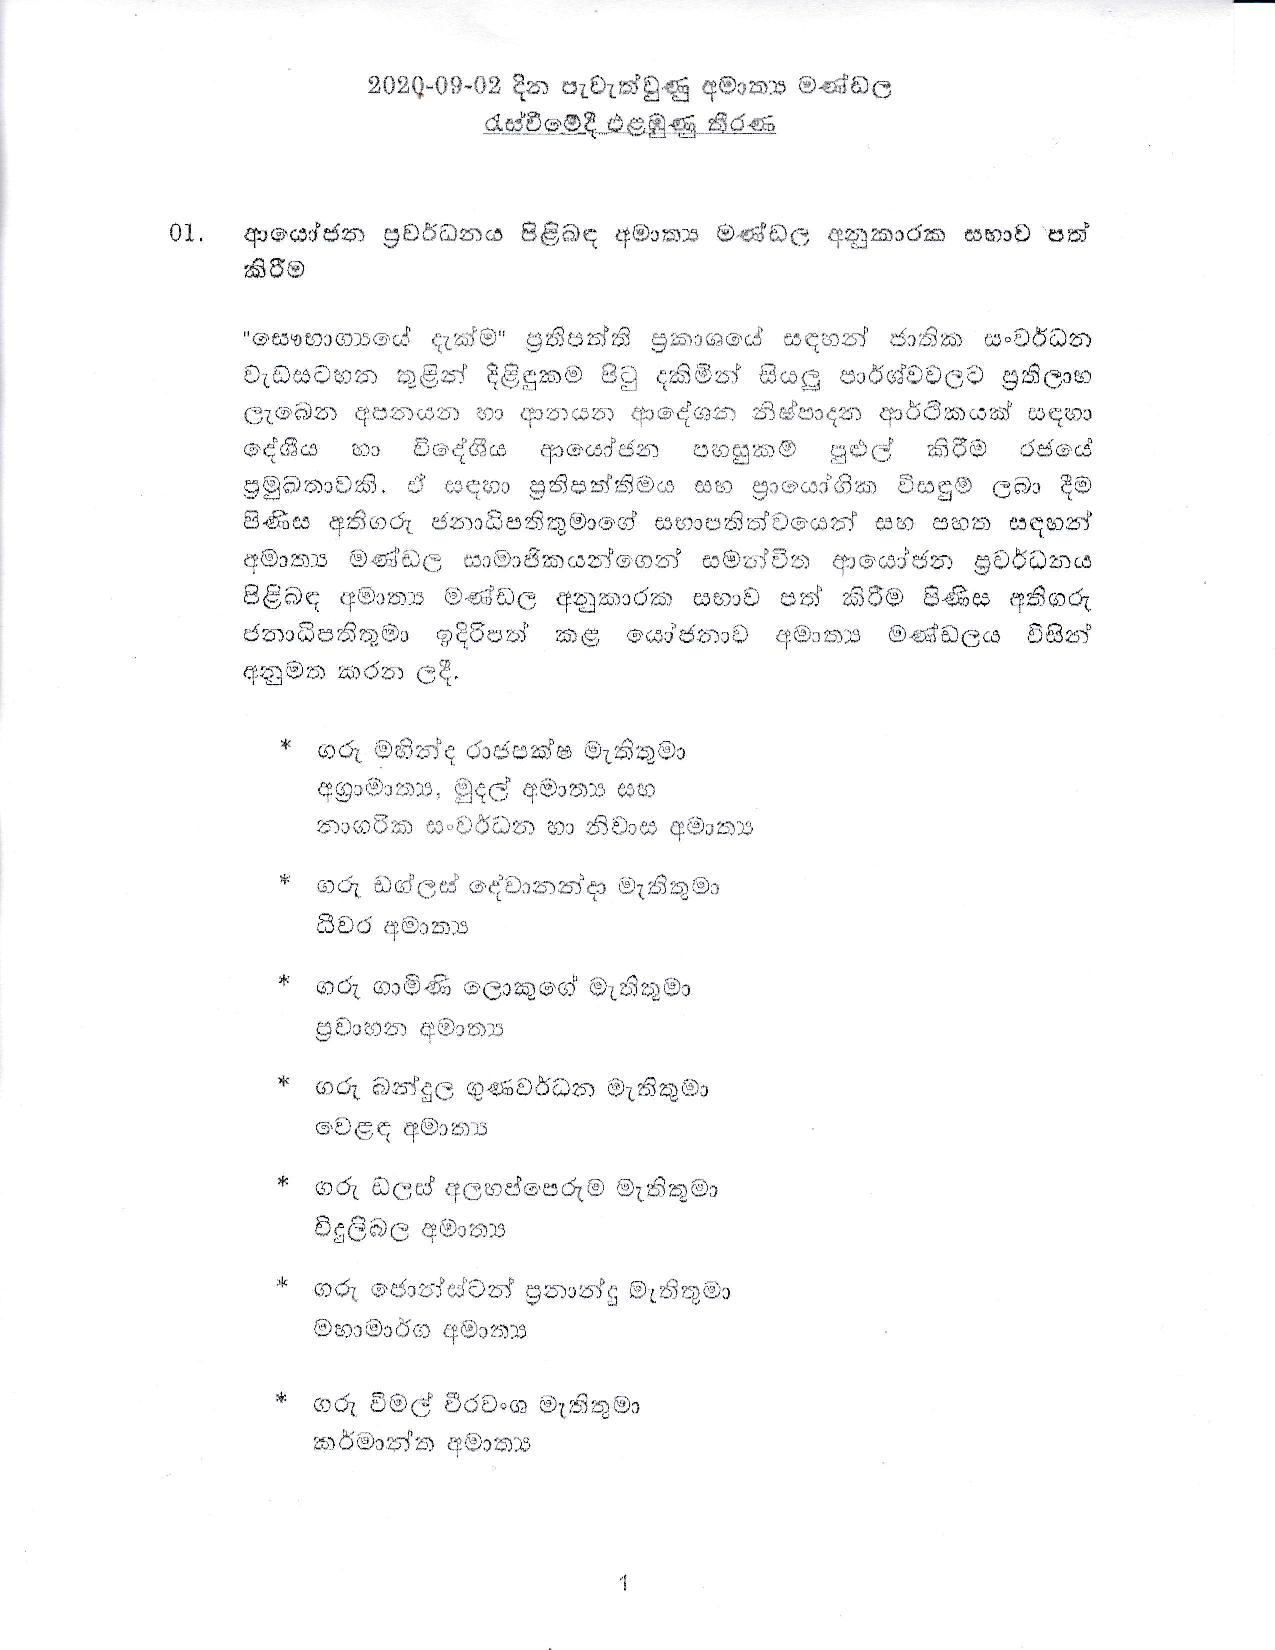 Cabinet decision on 02.09.2020 page 001